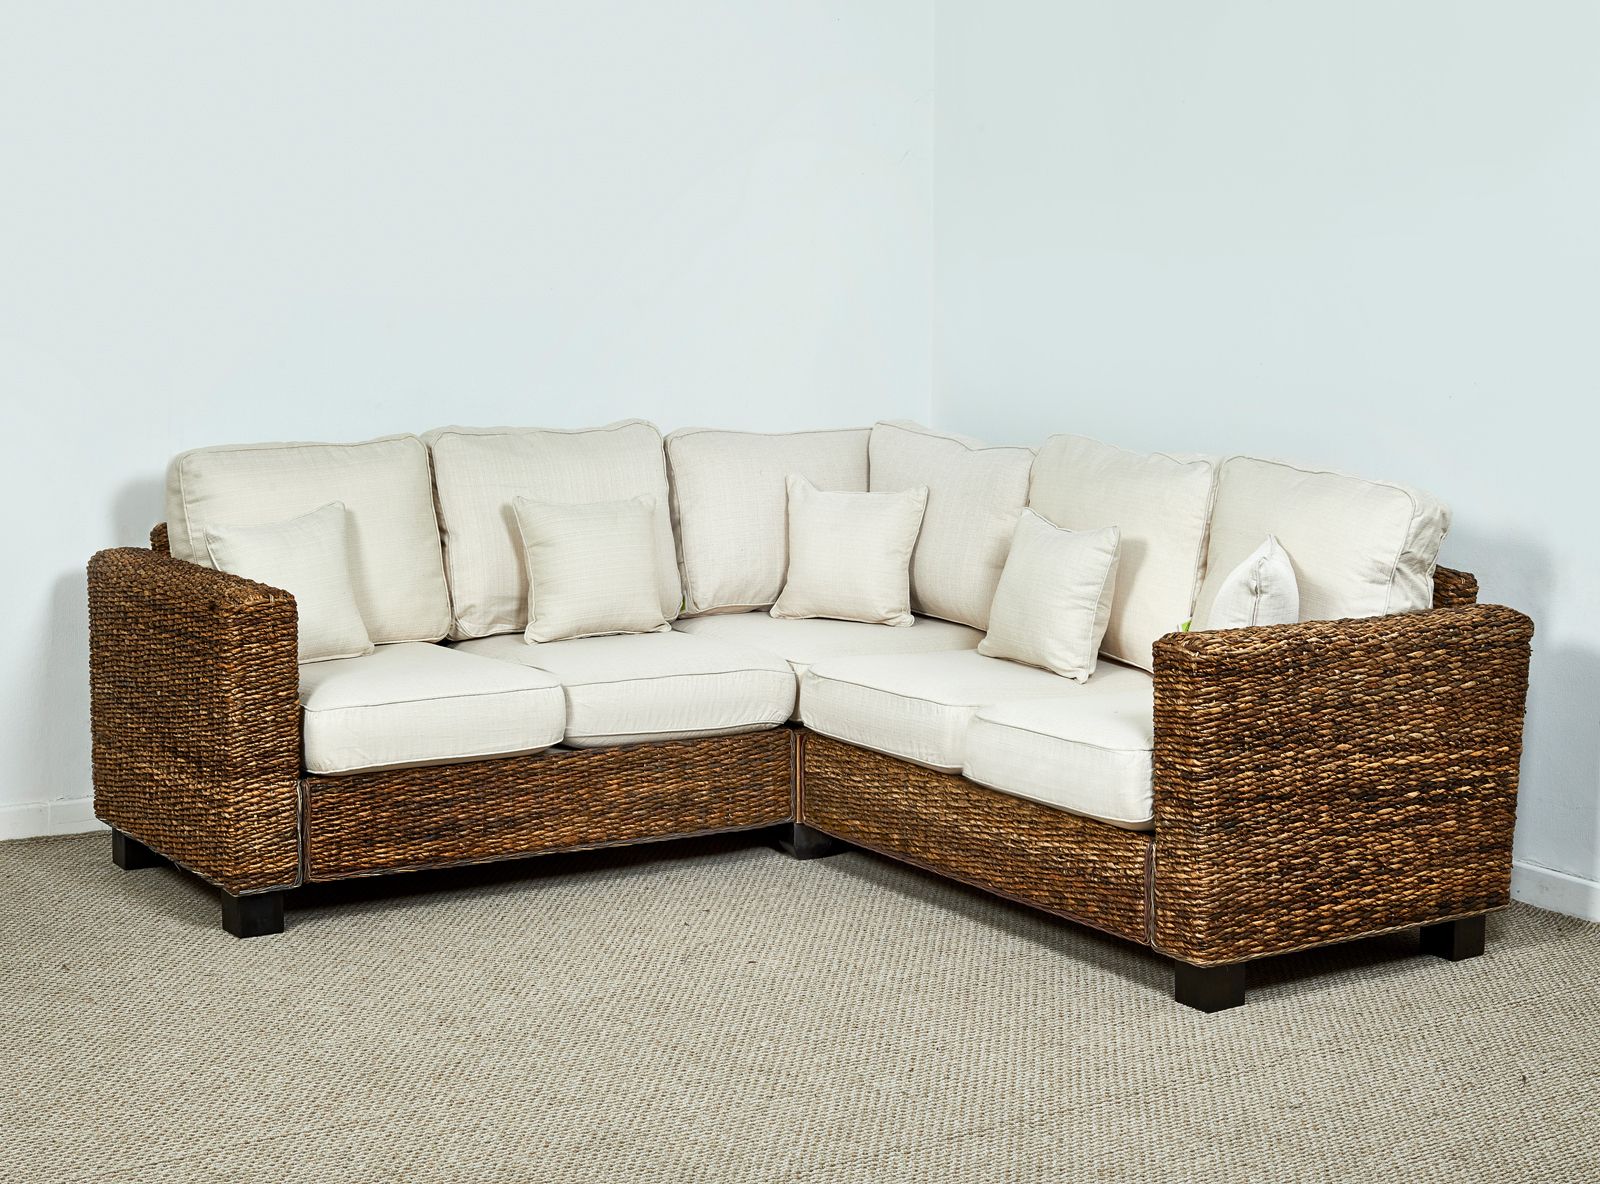 Natural Rattan Conservatory Corner Sofa In Oatmeal – Kensington Abaca With Rustic Brown Sectional Corner Desks (View 4 of 15)